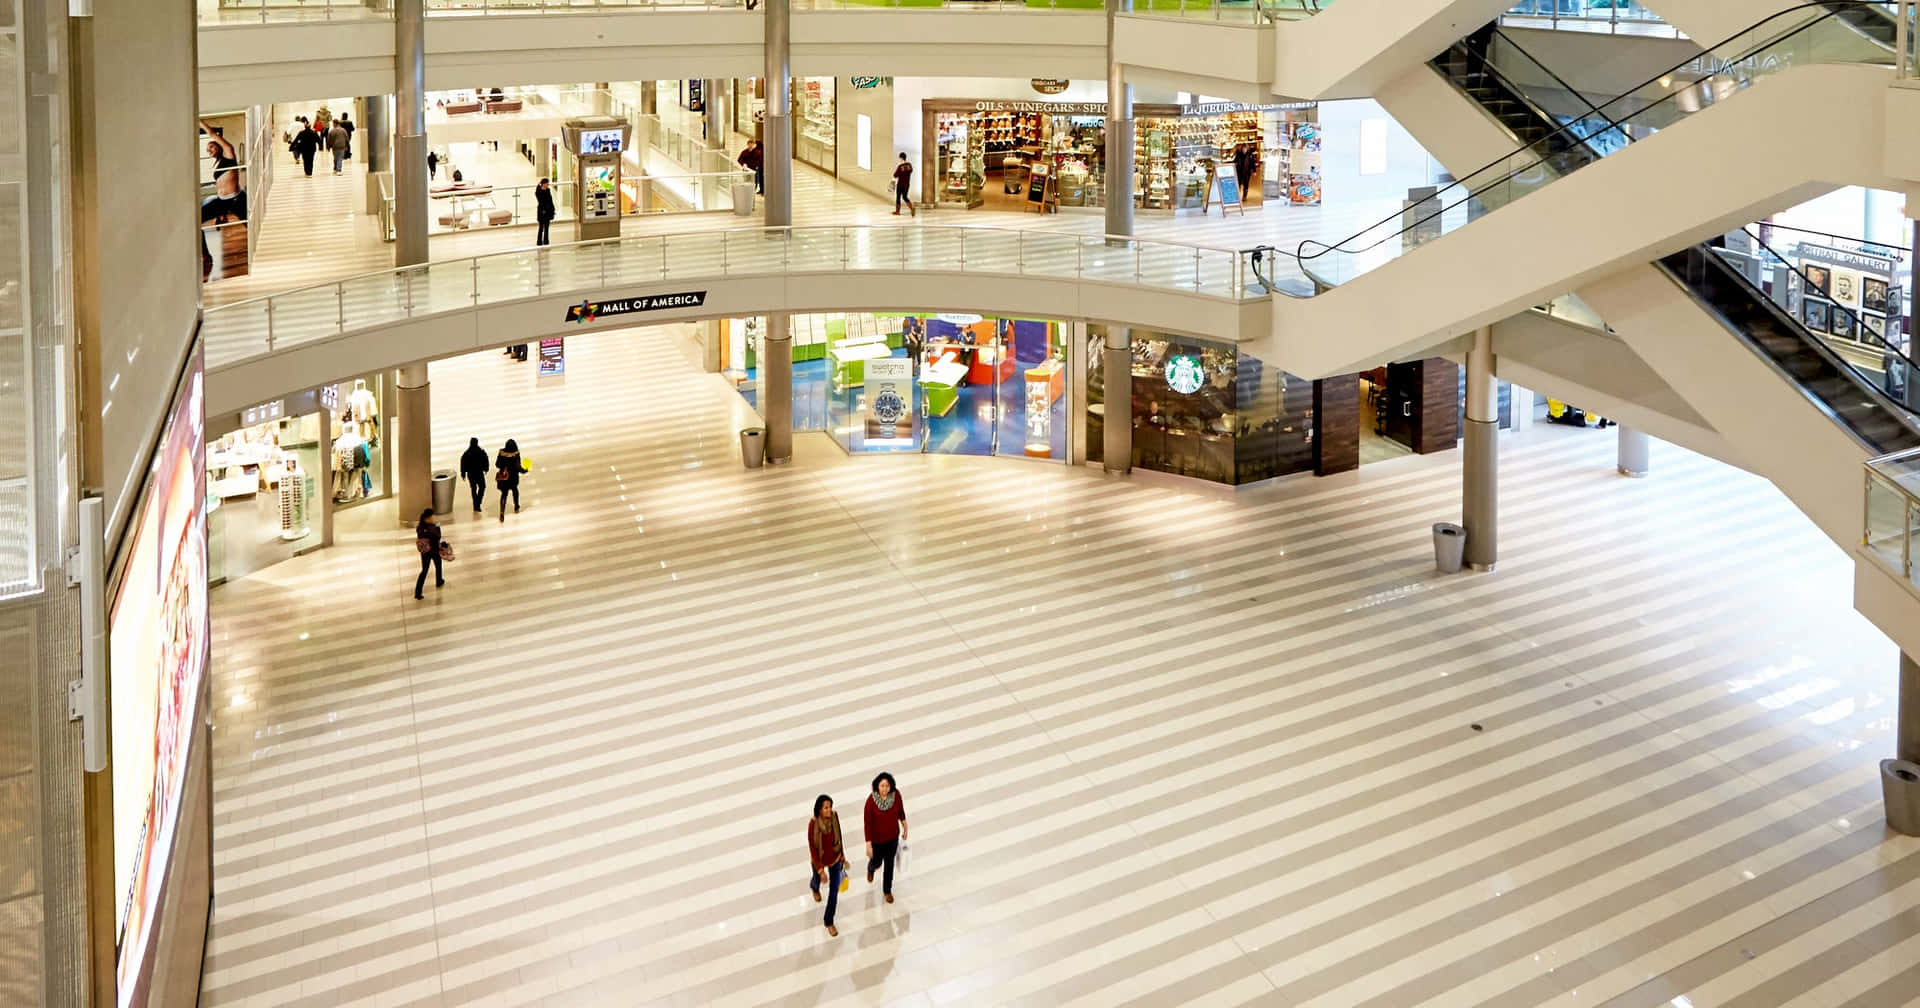 A Large Mall With People Walking Around